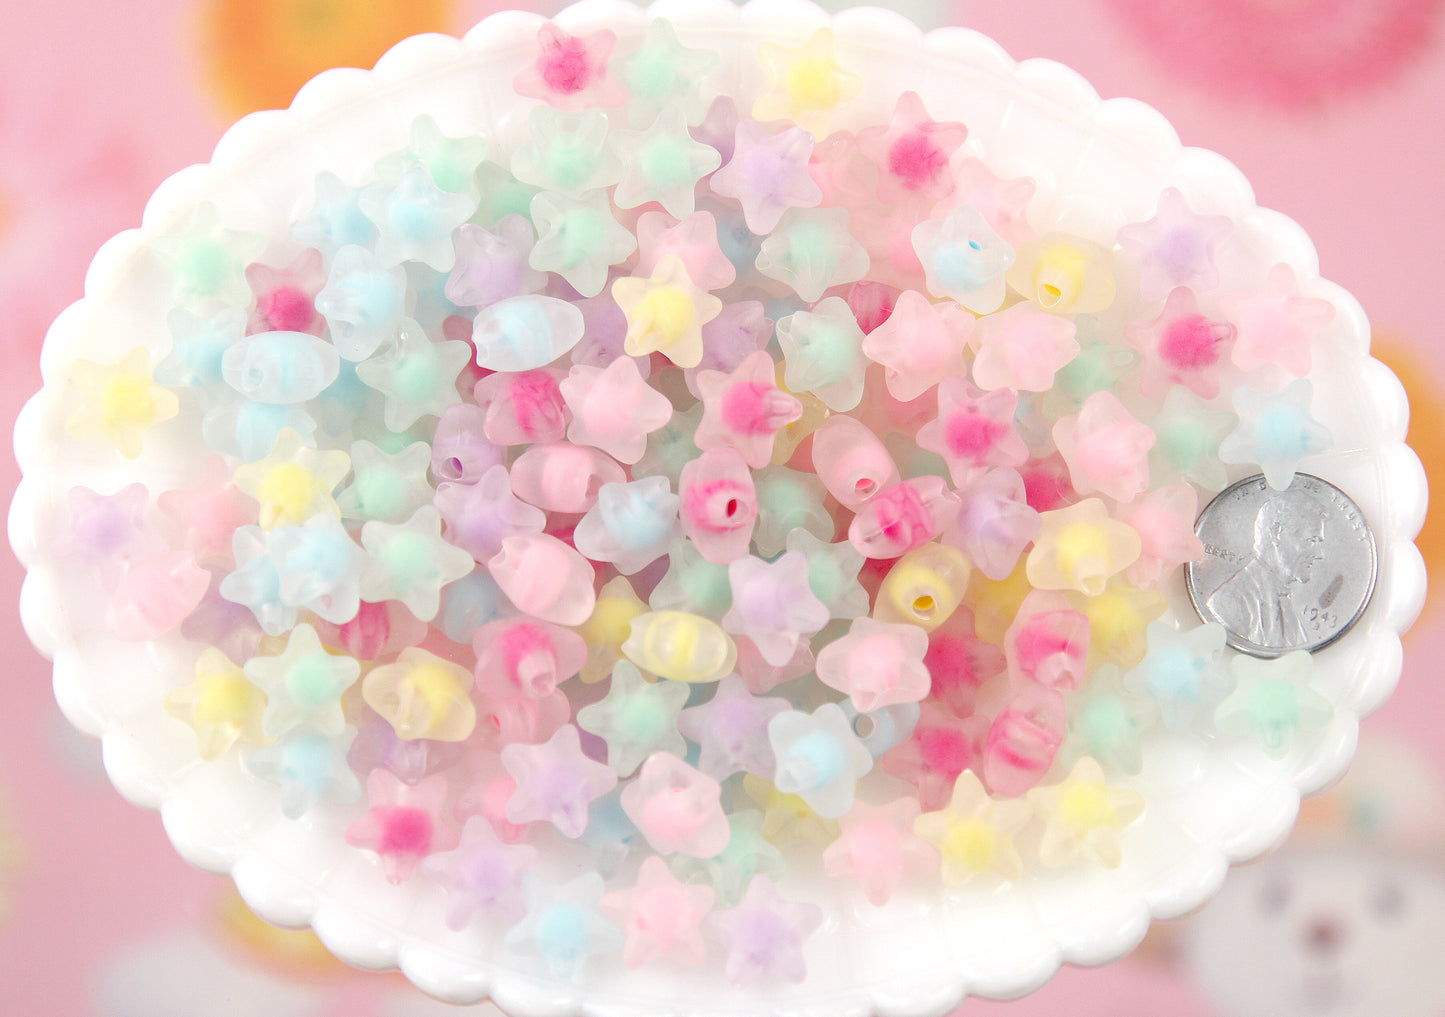 Pastel Star Beads - 12mm Small Pastel Matte Finish Acrylic Star Beads with Inner Bead - Cute Colorful Little Resin Star Beads - 150 pc set